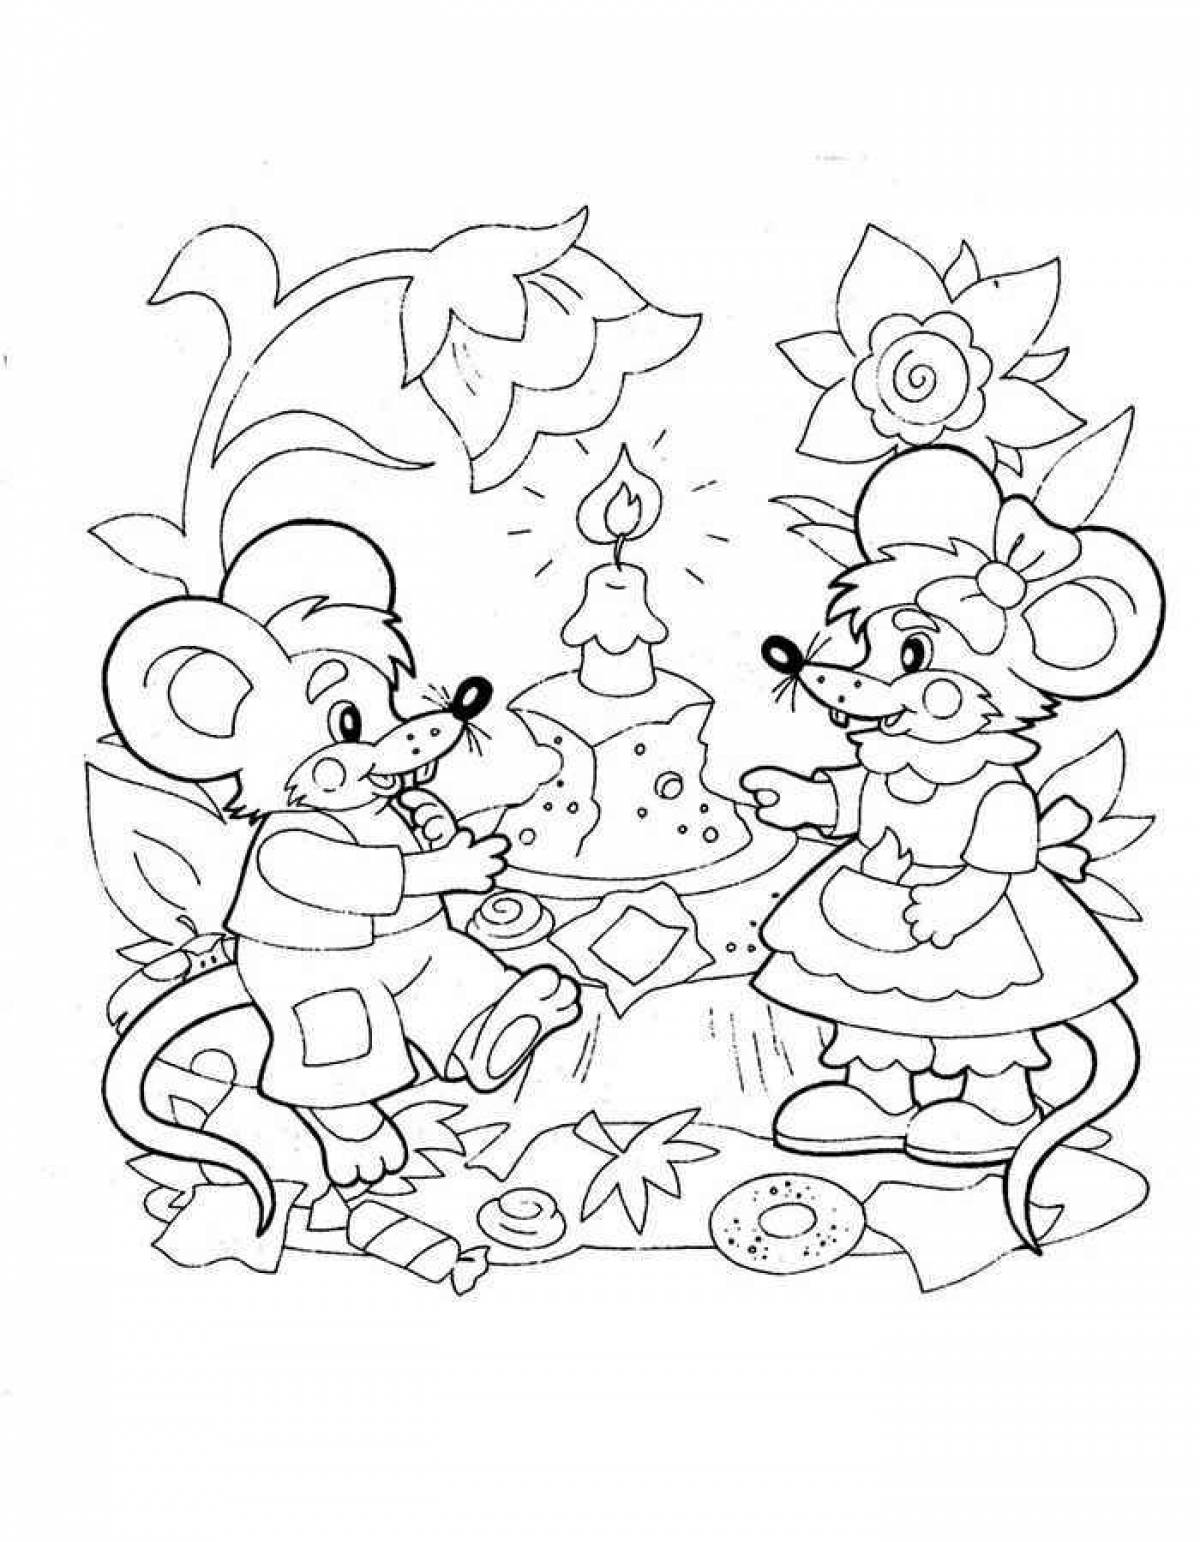 Color-frenzy coloring page for 7 years old